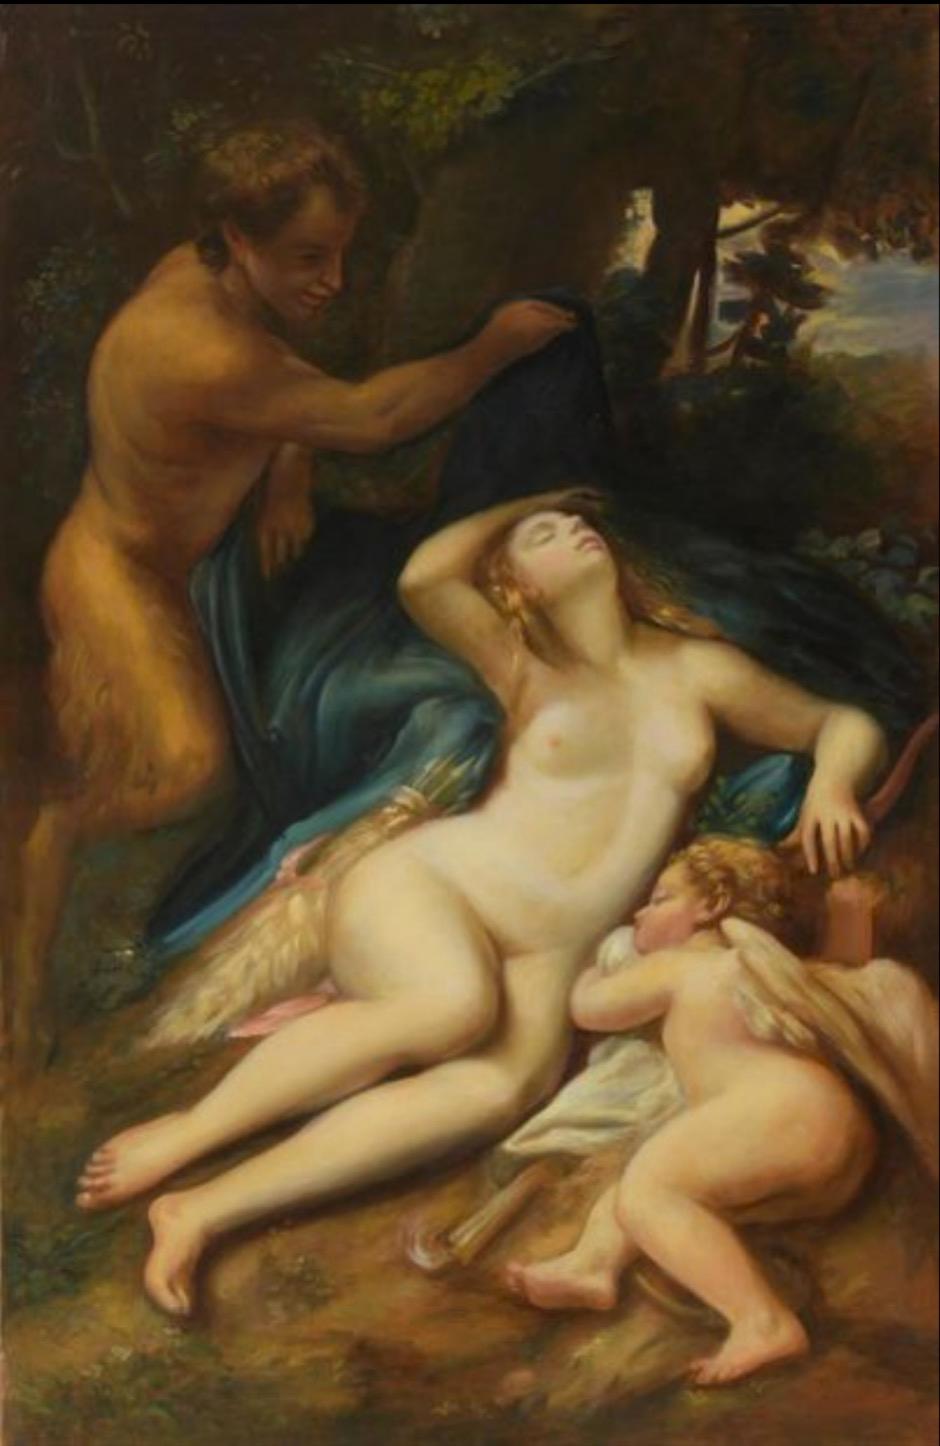 Atelier Dagher after Allegri da CORREGGIO (c.1489-1534) Figurative Painting - Sleeping Nymph and Love, Large Oil Painting on Canvas by Louvre Copyist